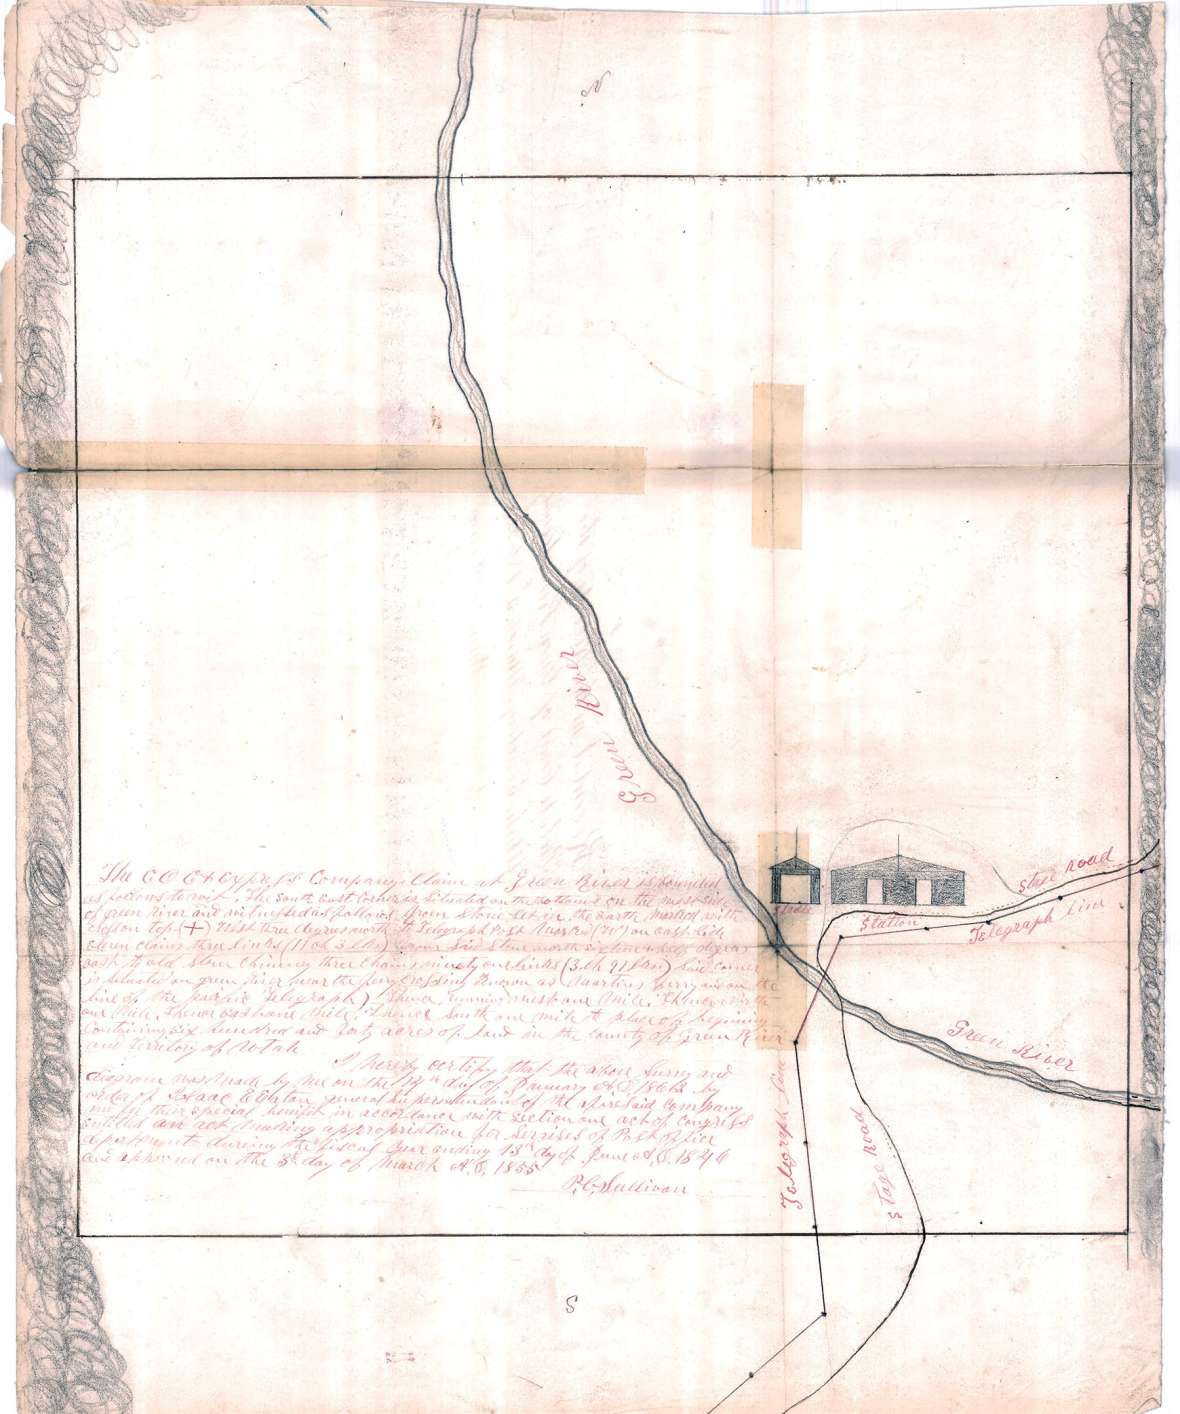 Shown here are notes and a sketch from an 1862 survey of the Central Overland California company’s claim to a square mile of land at Green River Station, prepared by a surveyor named Sullivan. See “Illustrations” at the end of the article for a transcription of the survey notes and more on the source. Wyoming State Archives. Click to enlarge